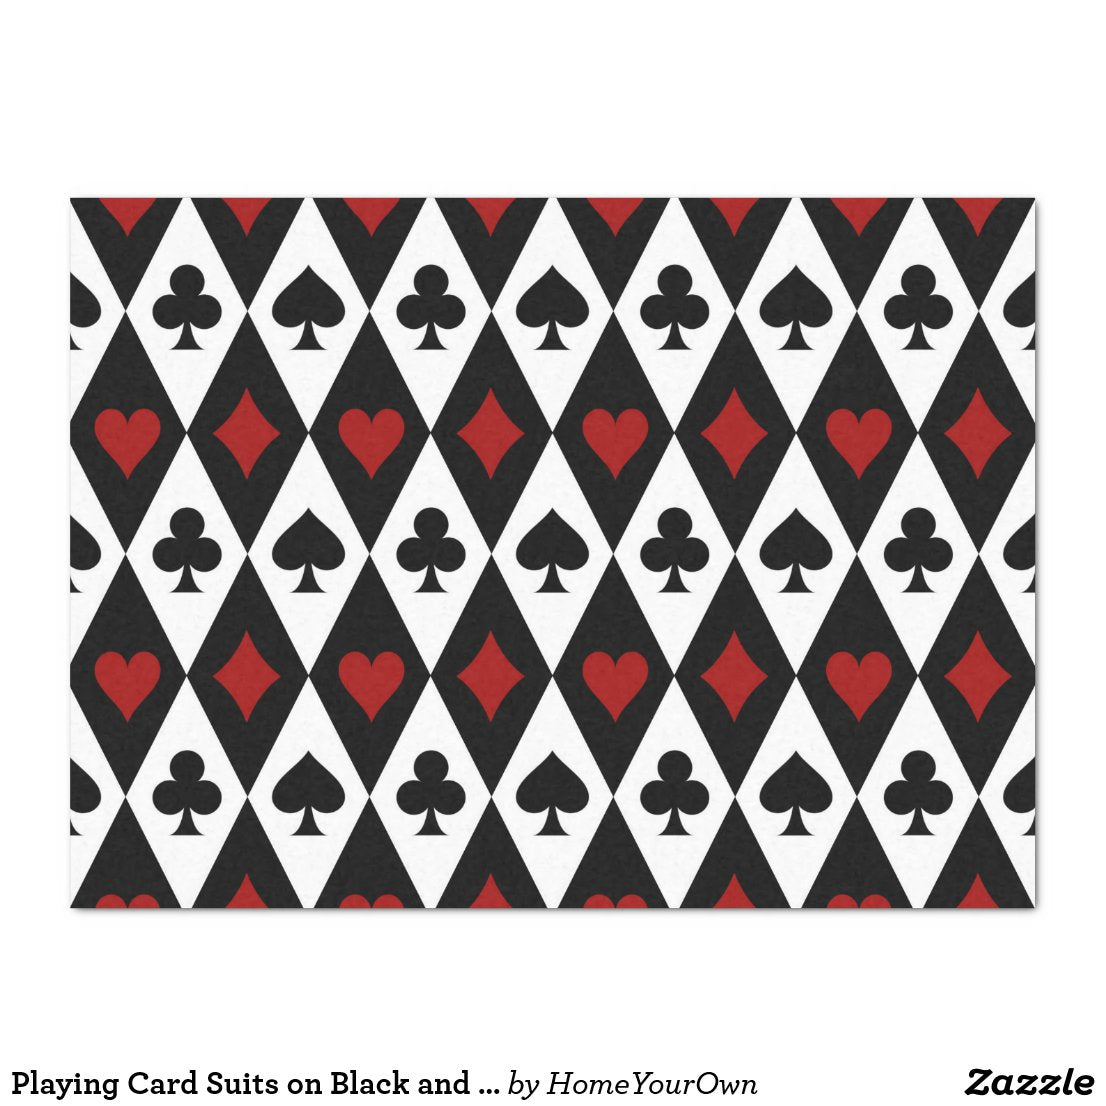 Zazzle - Playing Card Suits on Black and White Decoupage Tissue Paper